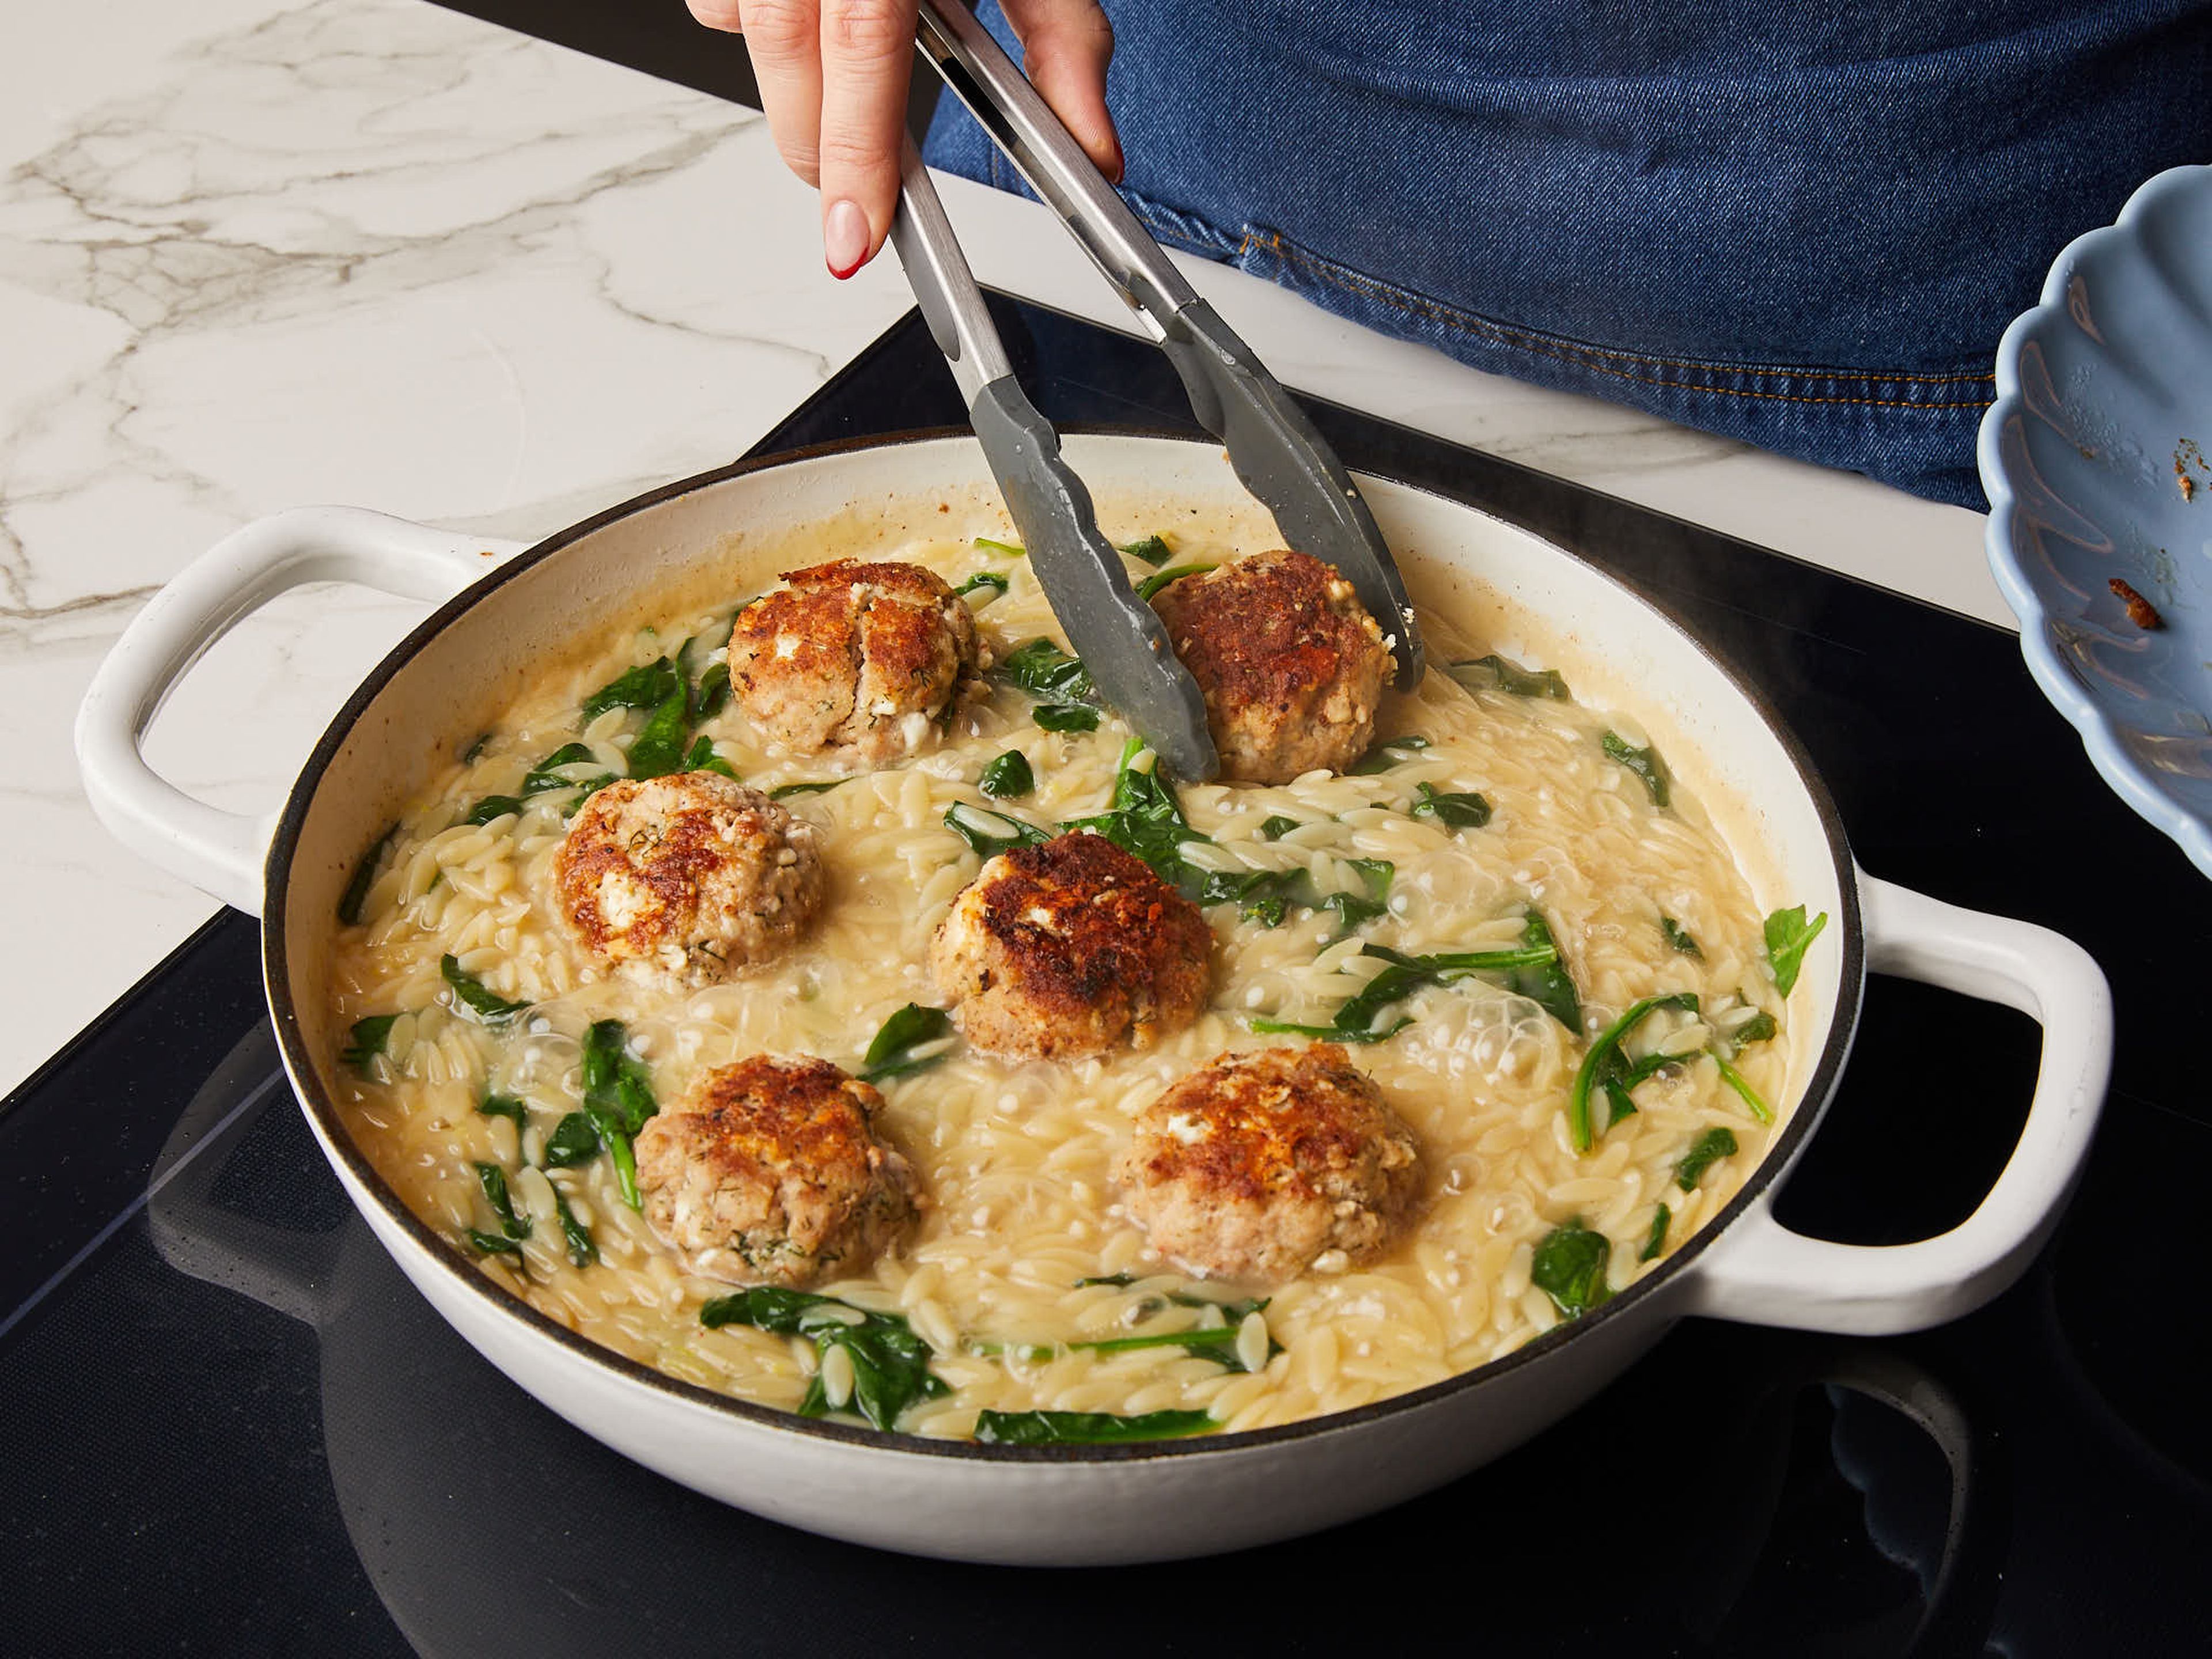 Add lemon zest, juice, salt and pepper to the orzo to taste, stirring well to season. Return meatballs to the pan to gently reheat them. Slice your remaining lemon into wedges. Sprinkle dill, remaining feta and lemon wedges to serve.